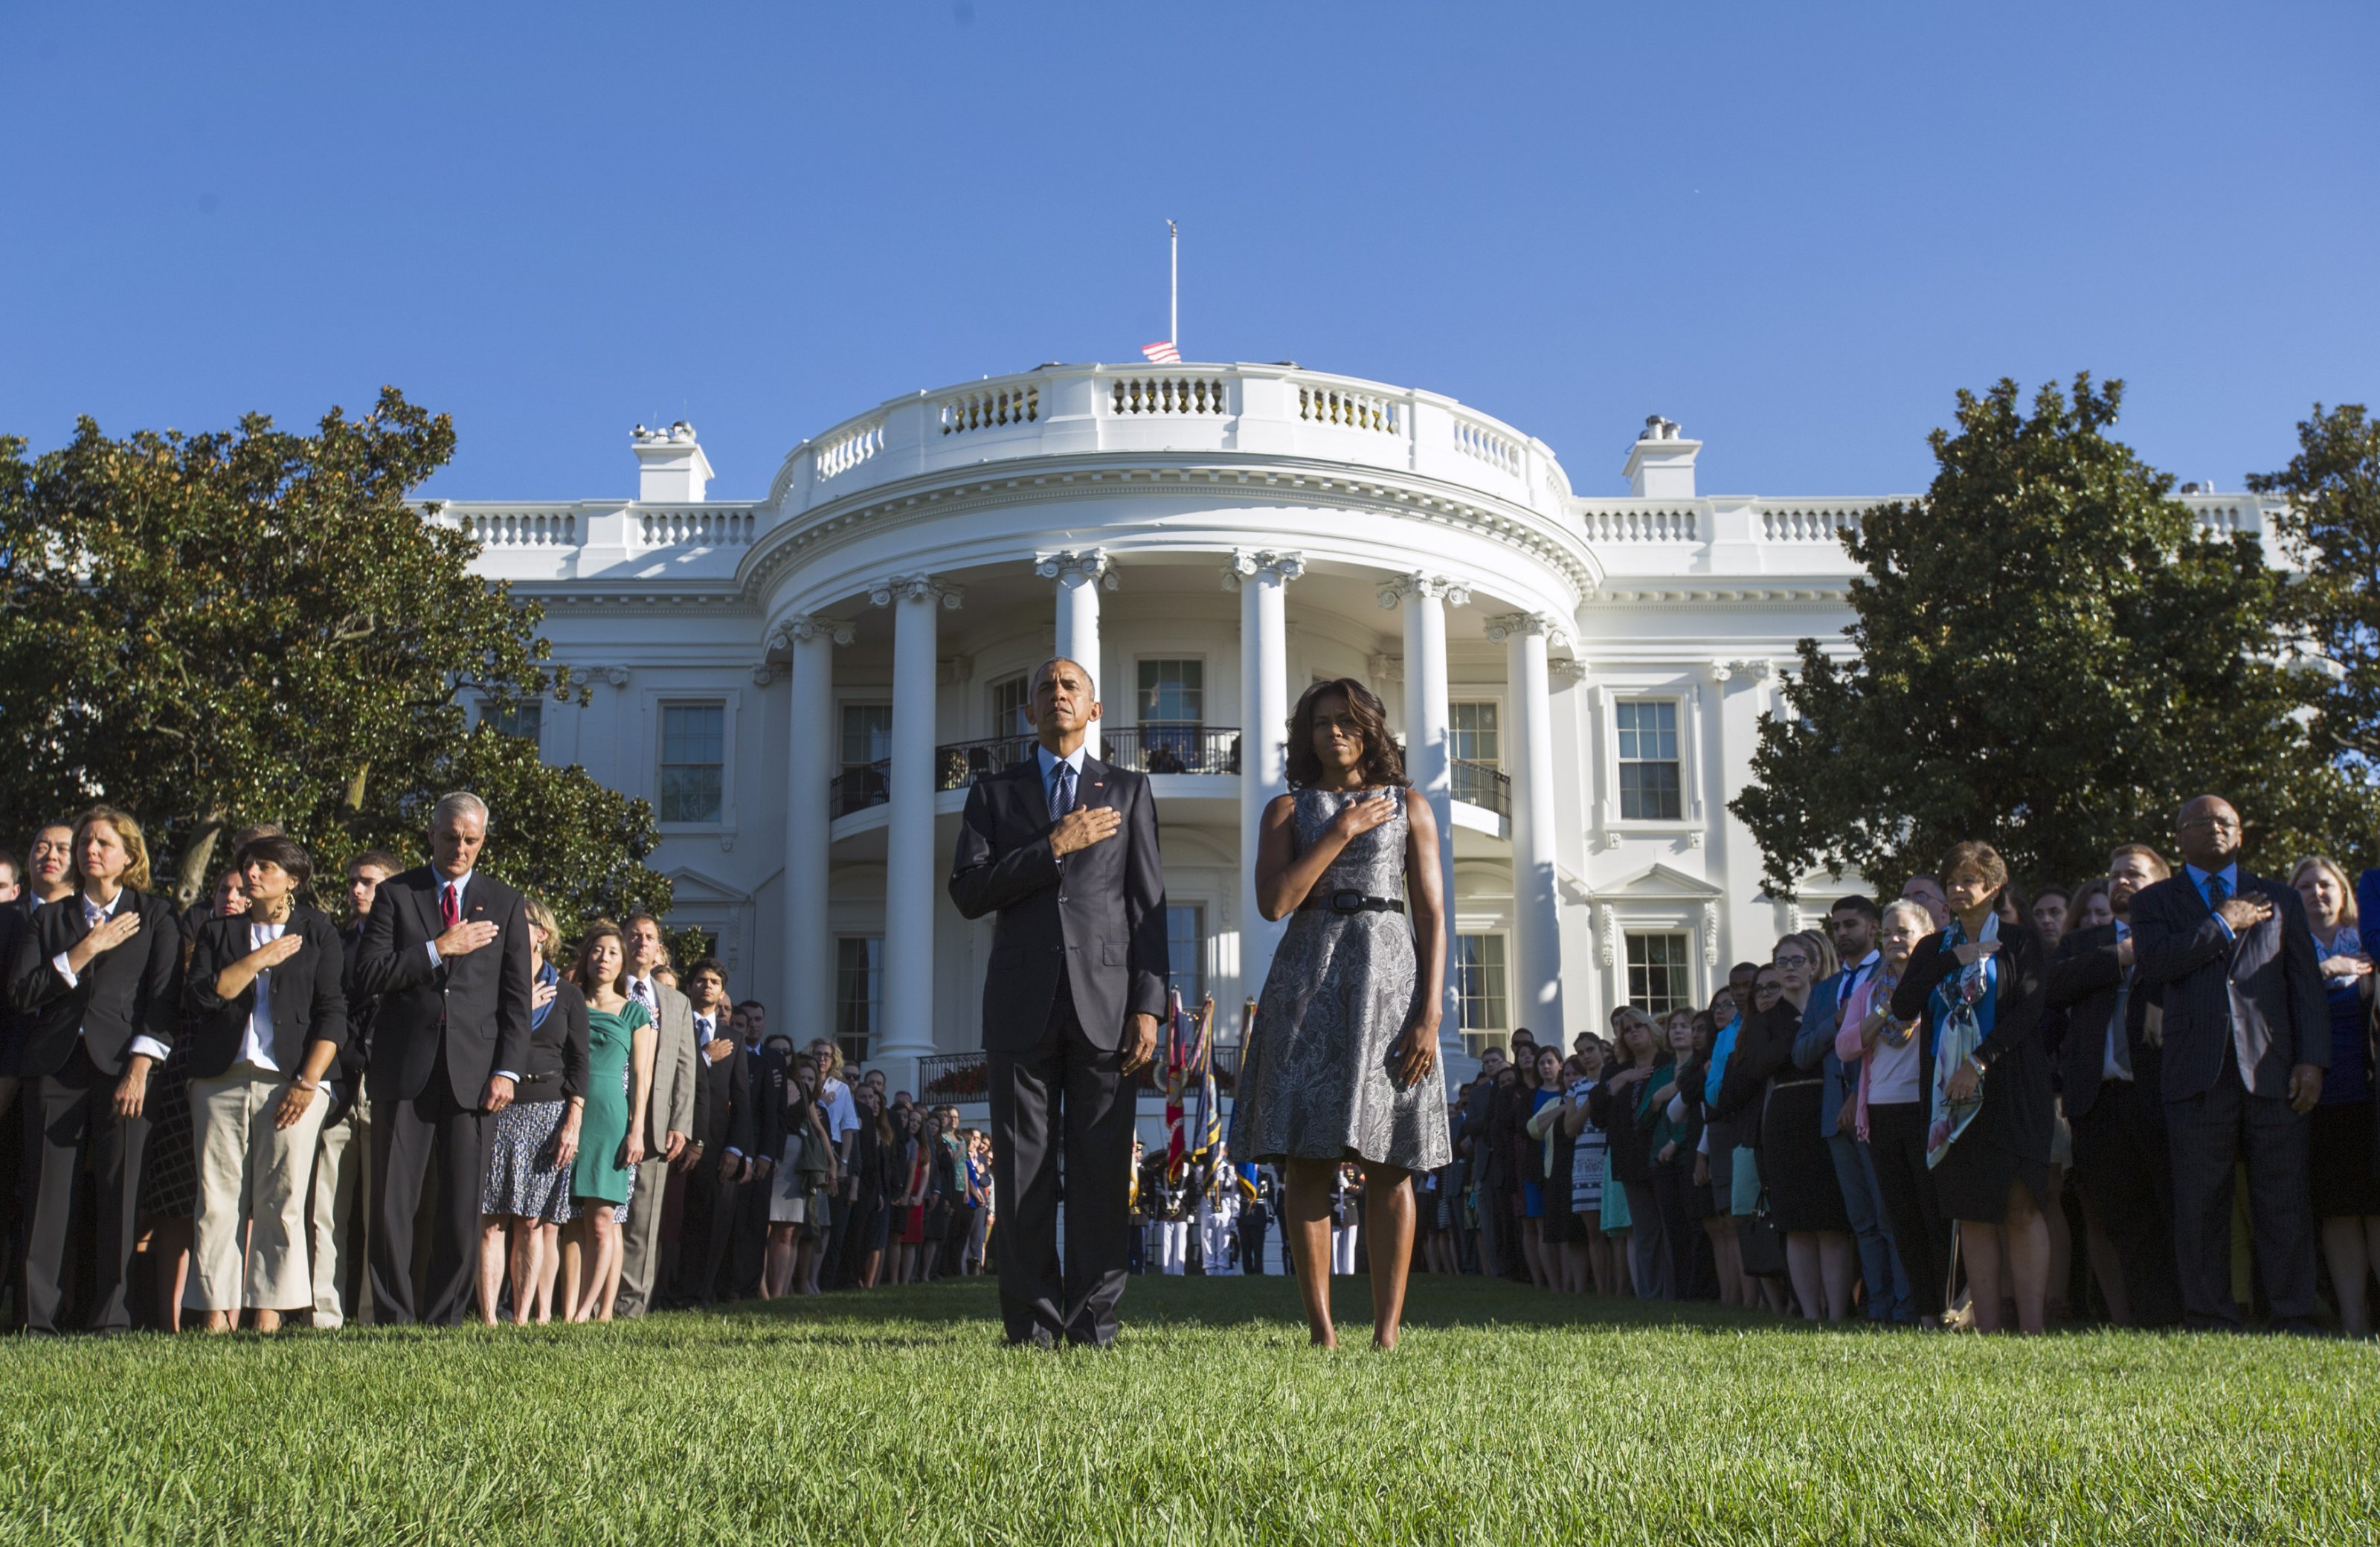 President Barack Obama and First Lady Michelle Obama, joined by White House staff, stand as Taps is played on the 14th anniversary of the September 11 terrorist attacks on the United States, at the White House in Washington, D.C. on September 11, 2015. Photo by Kevin Dietsch/UPI/ABACAPRESS.COM